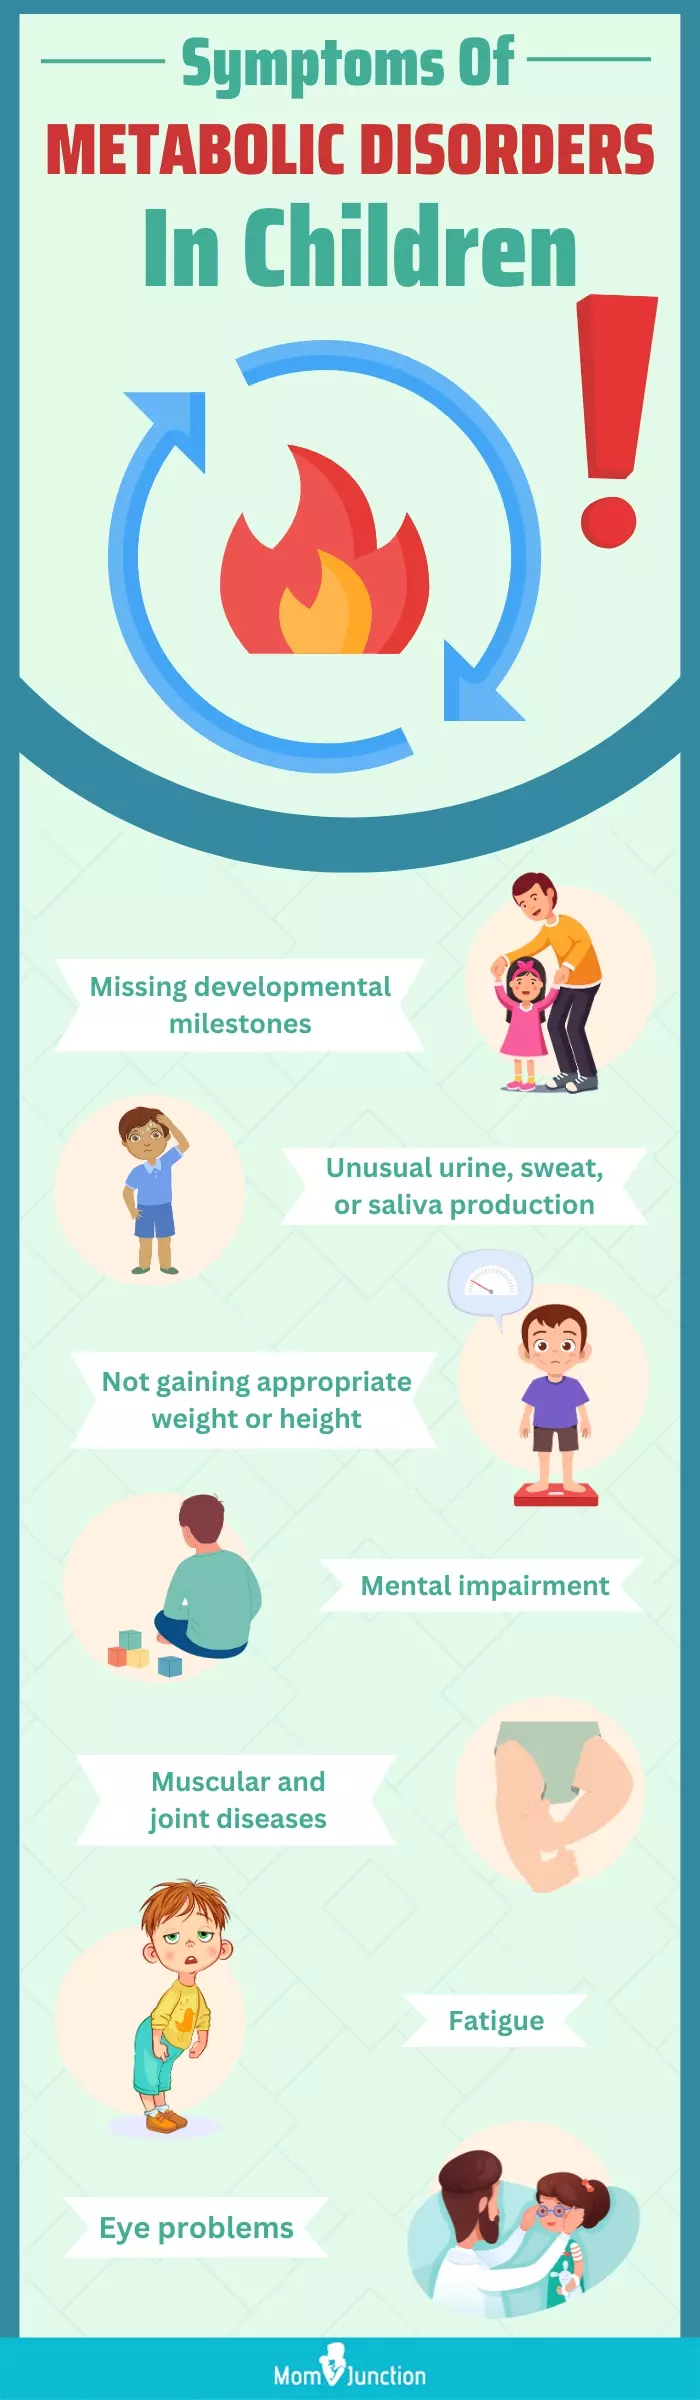 symptoms of metabolic disorders in children (infographic) 